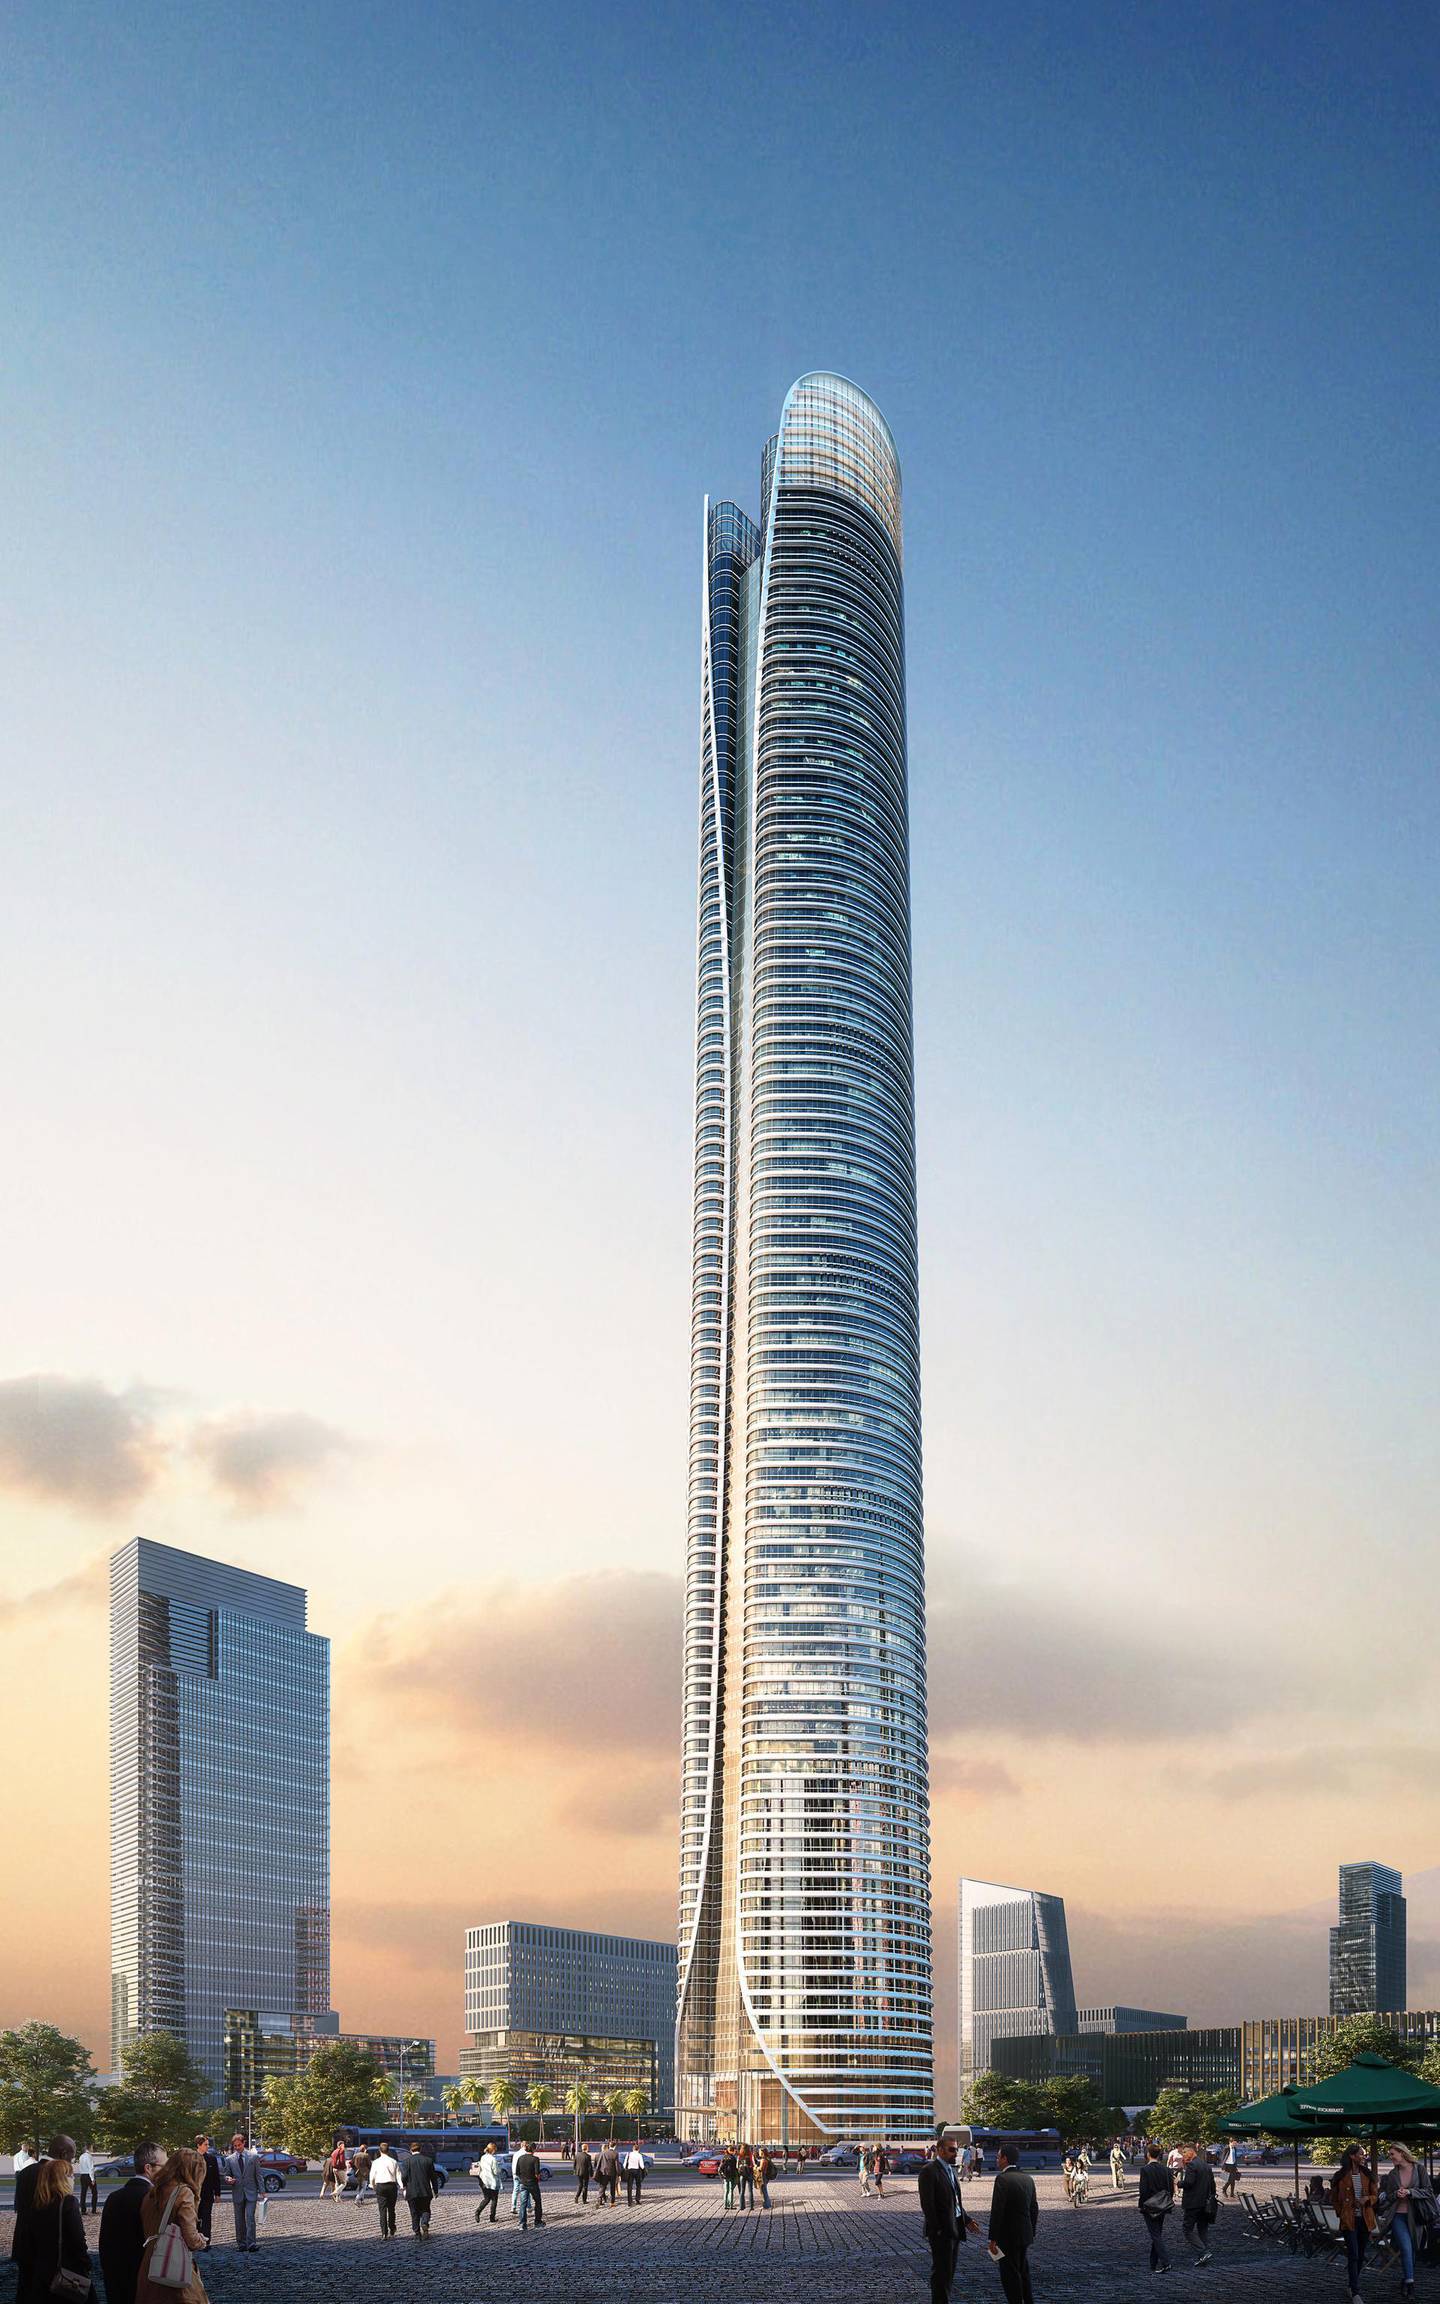 A rendering of Iconic Tower. The Capital Business District (CBD) being built in Cairo’s New Administrative Capital. The 20 skyscrapers in the district include the 385-metre Iconic Tower, which will be the tallest building in Africa. Photo: Dar Al Hendasah